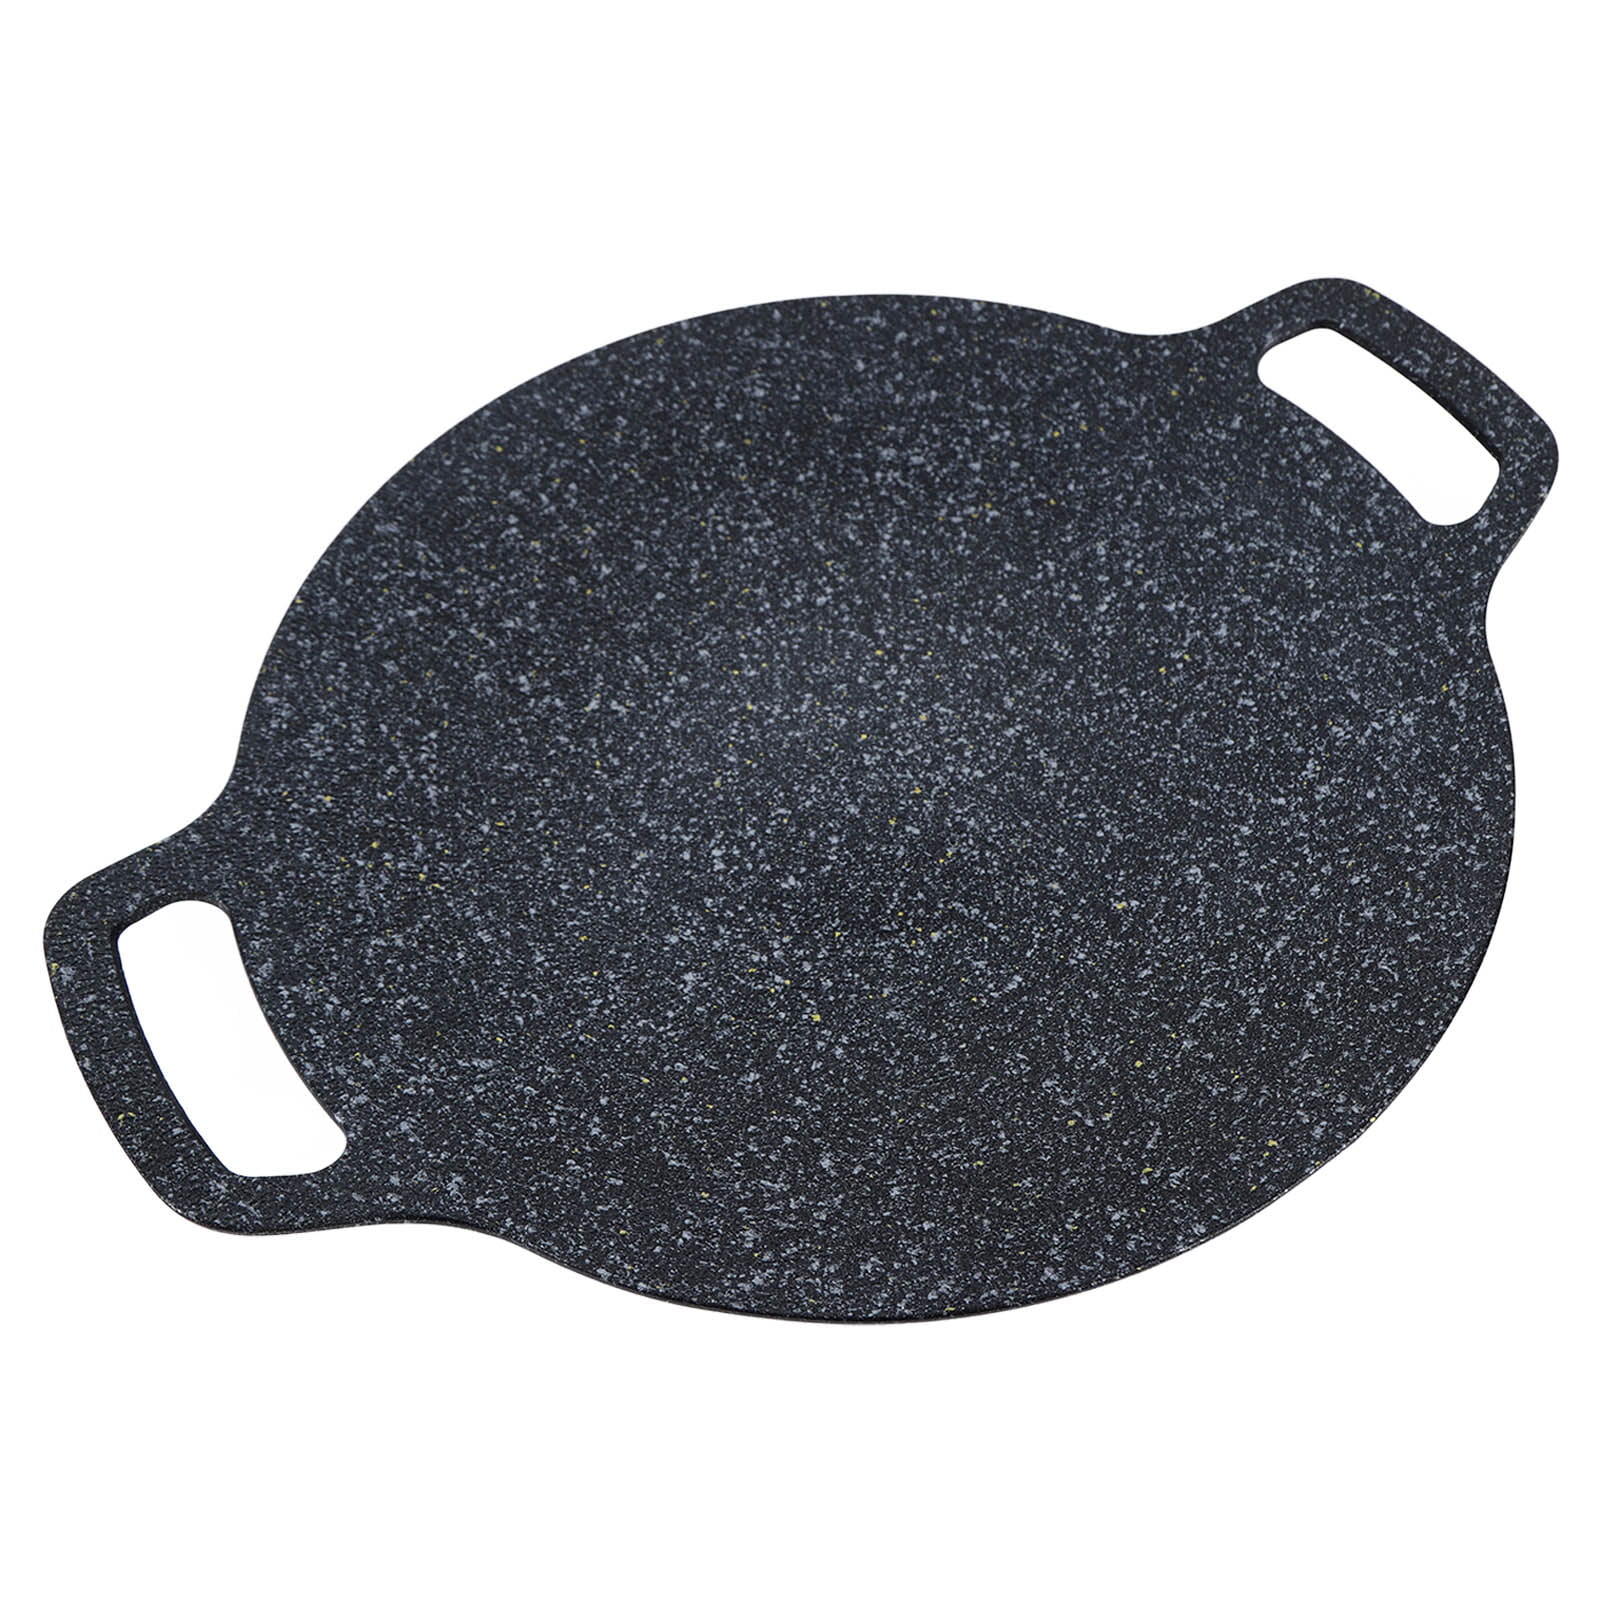 Grill For Stovetop Medical Stone Coated Griddle Pan For Stove Top